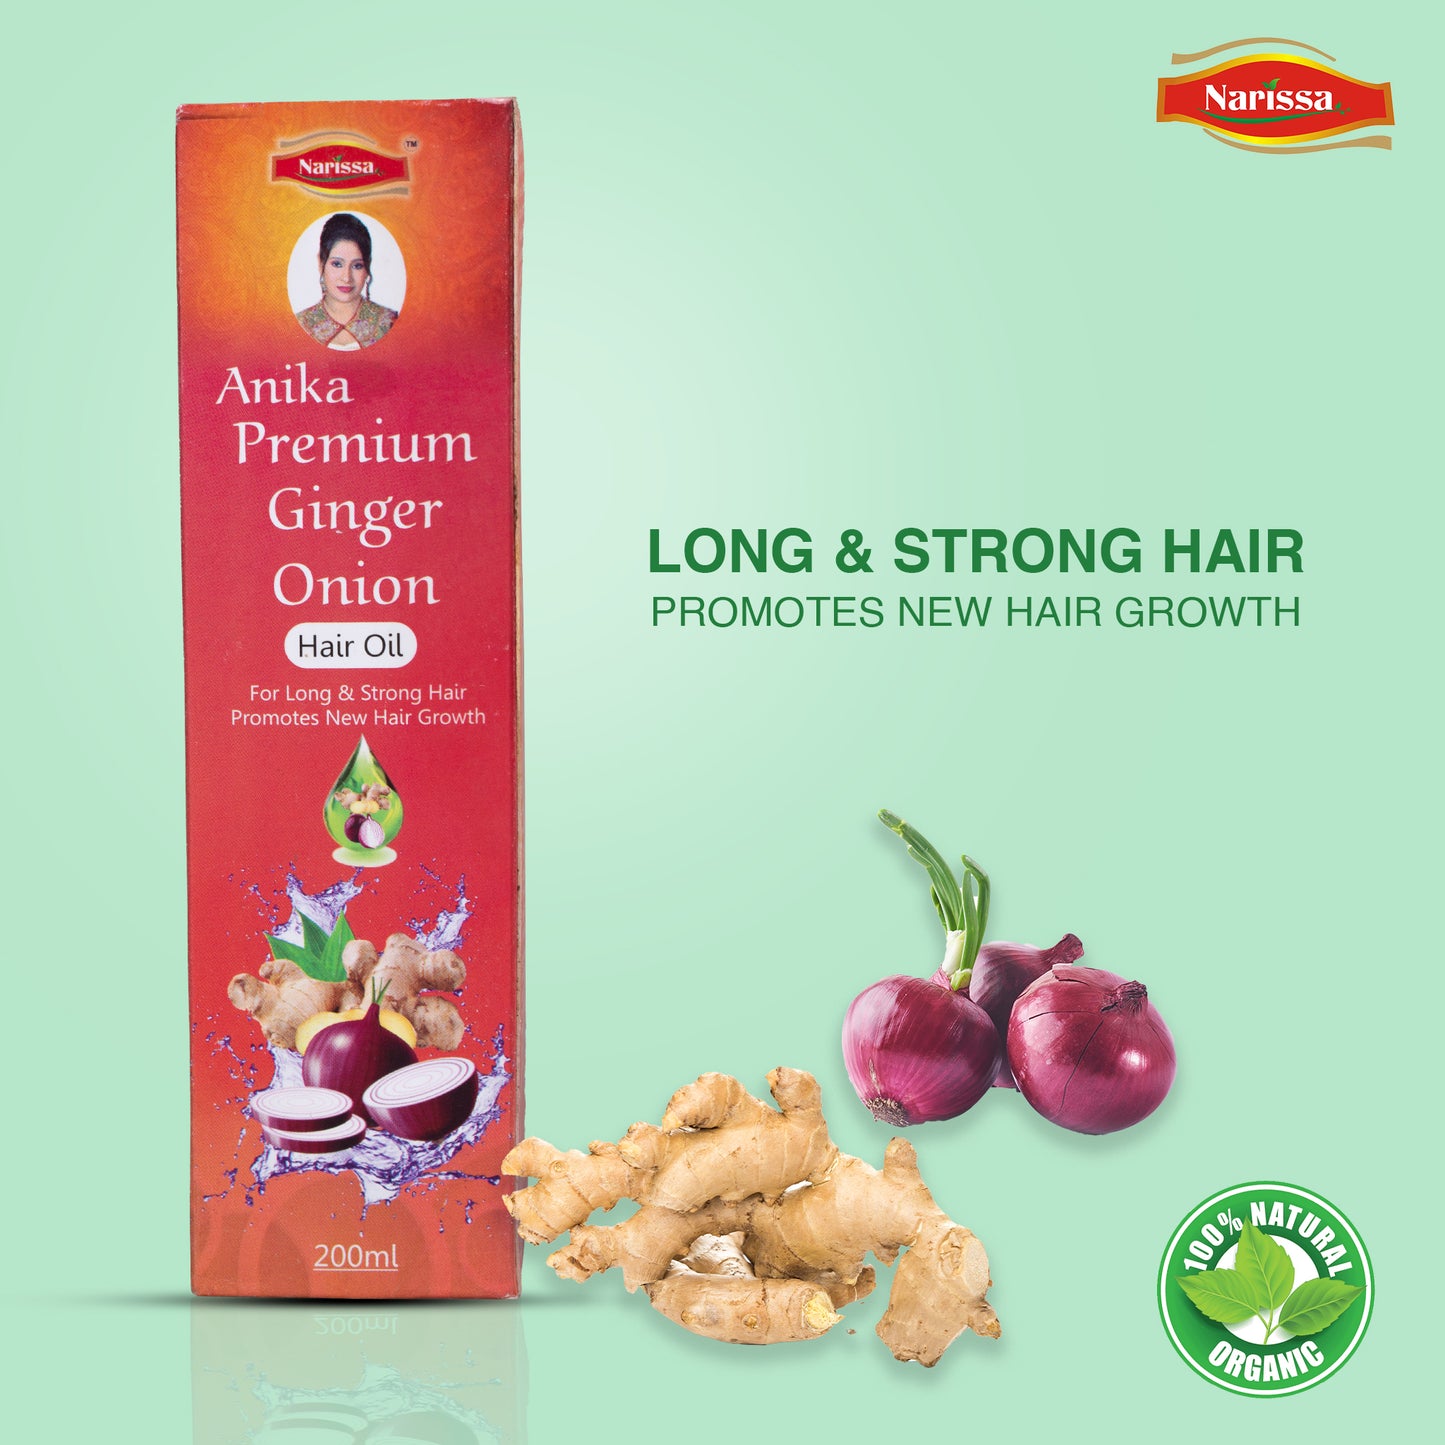 Anika Premium Ginger Onion Hair Oil - Nourish and Strengthen Your Locks for Luxuriously Long and Strong Hair